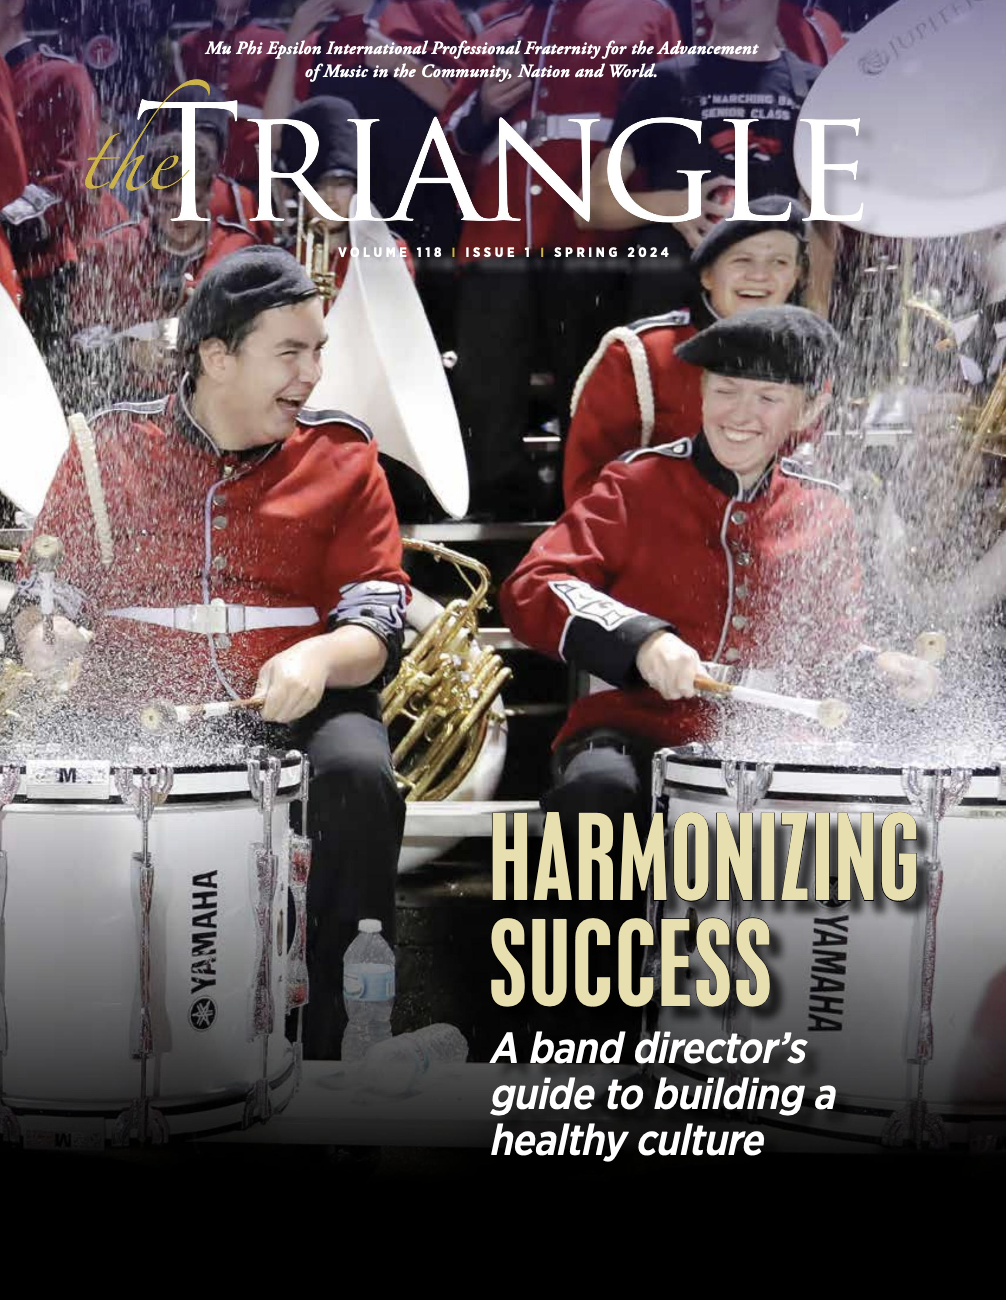 Cover for the Spring '24 issue of The Triangle.